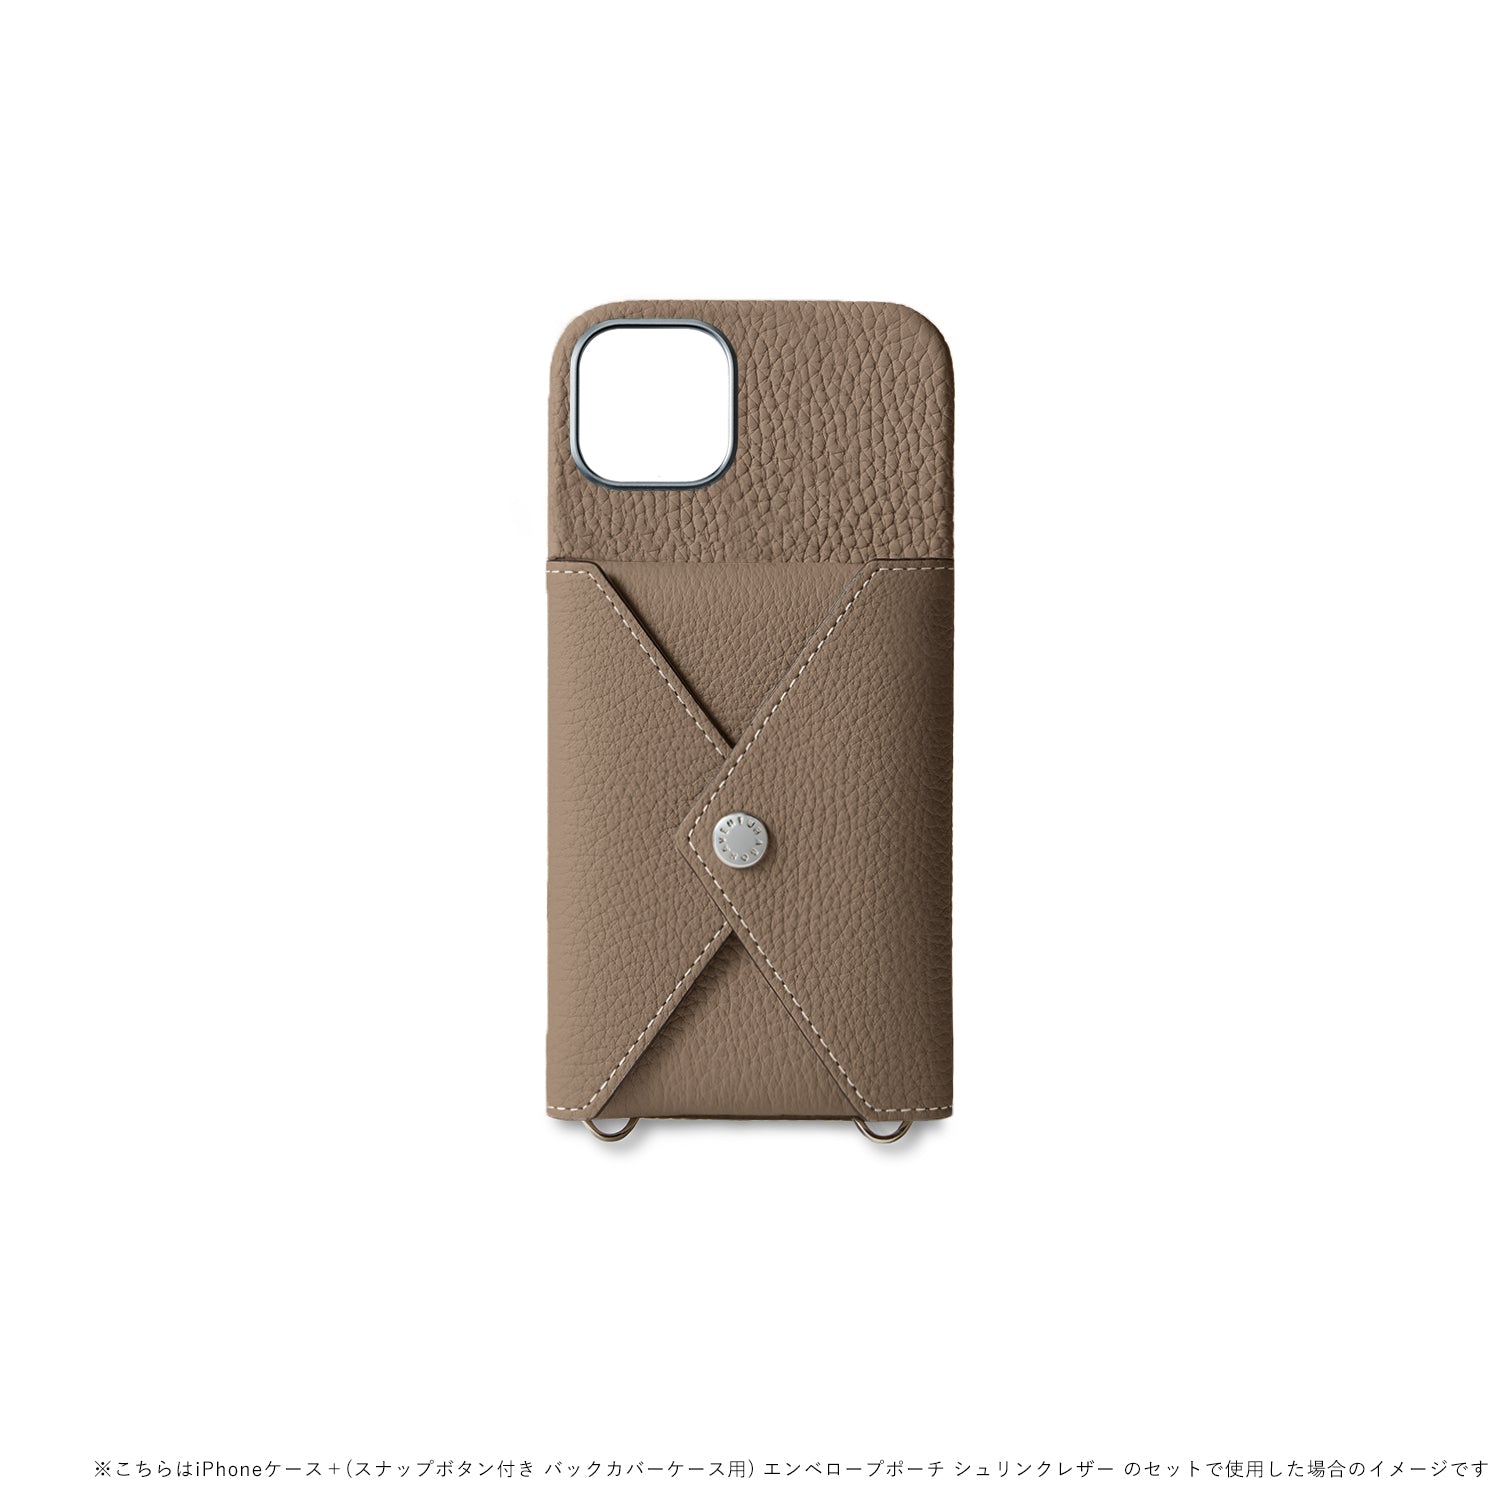 (iPhone 15 Plus) Snap button back cover case in shrink leather